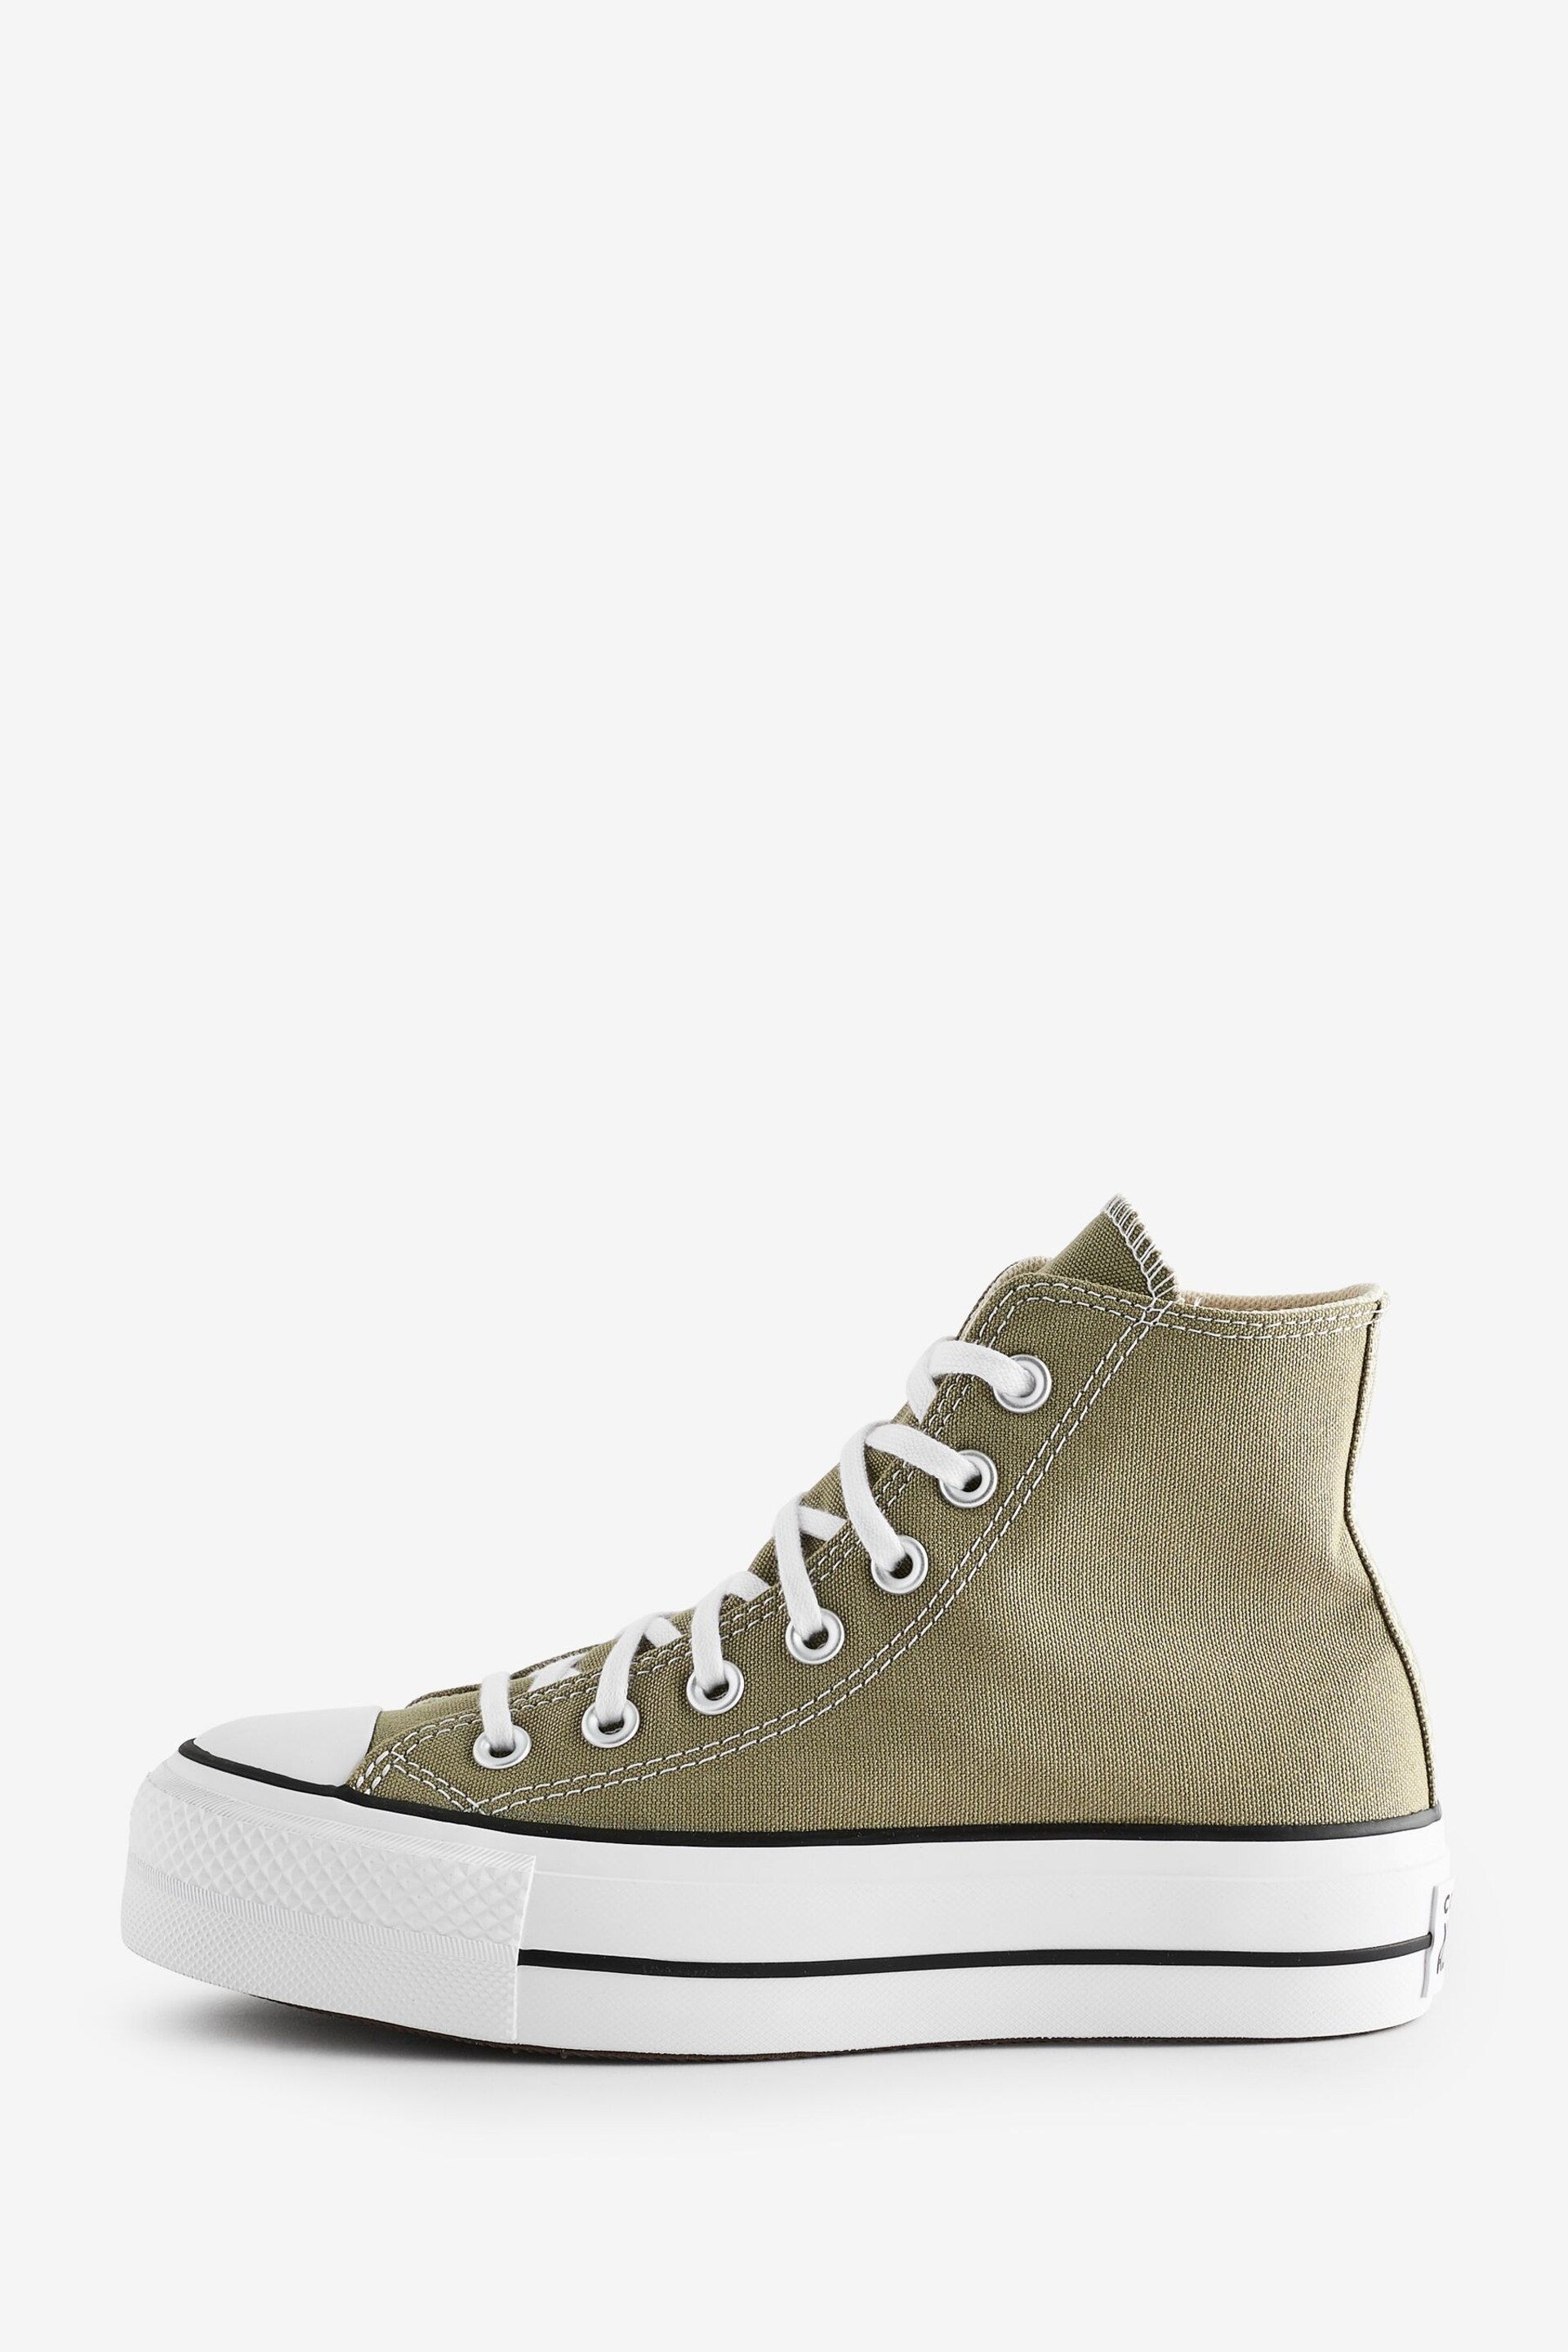 Converse Khaki Green Chuck Taylor All Star High Top Lift Trainers - Image 2 of 9